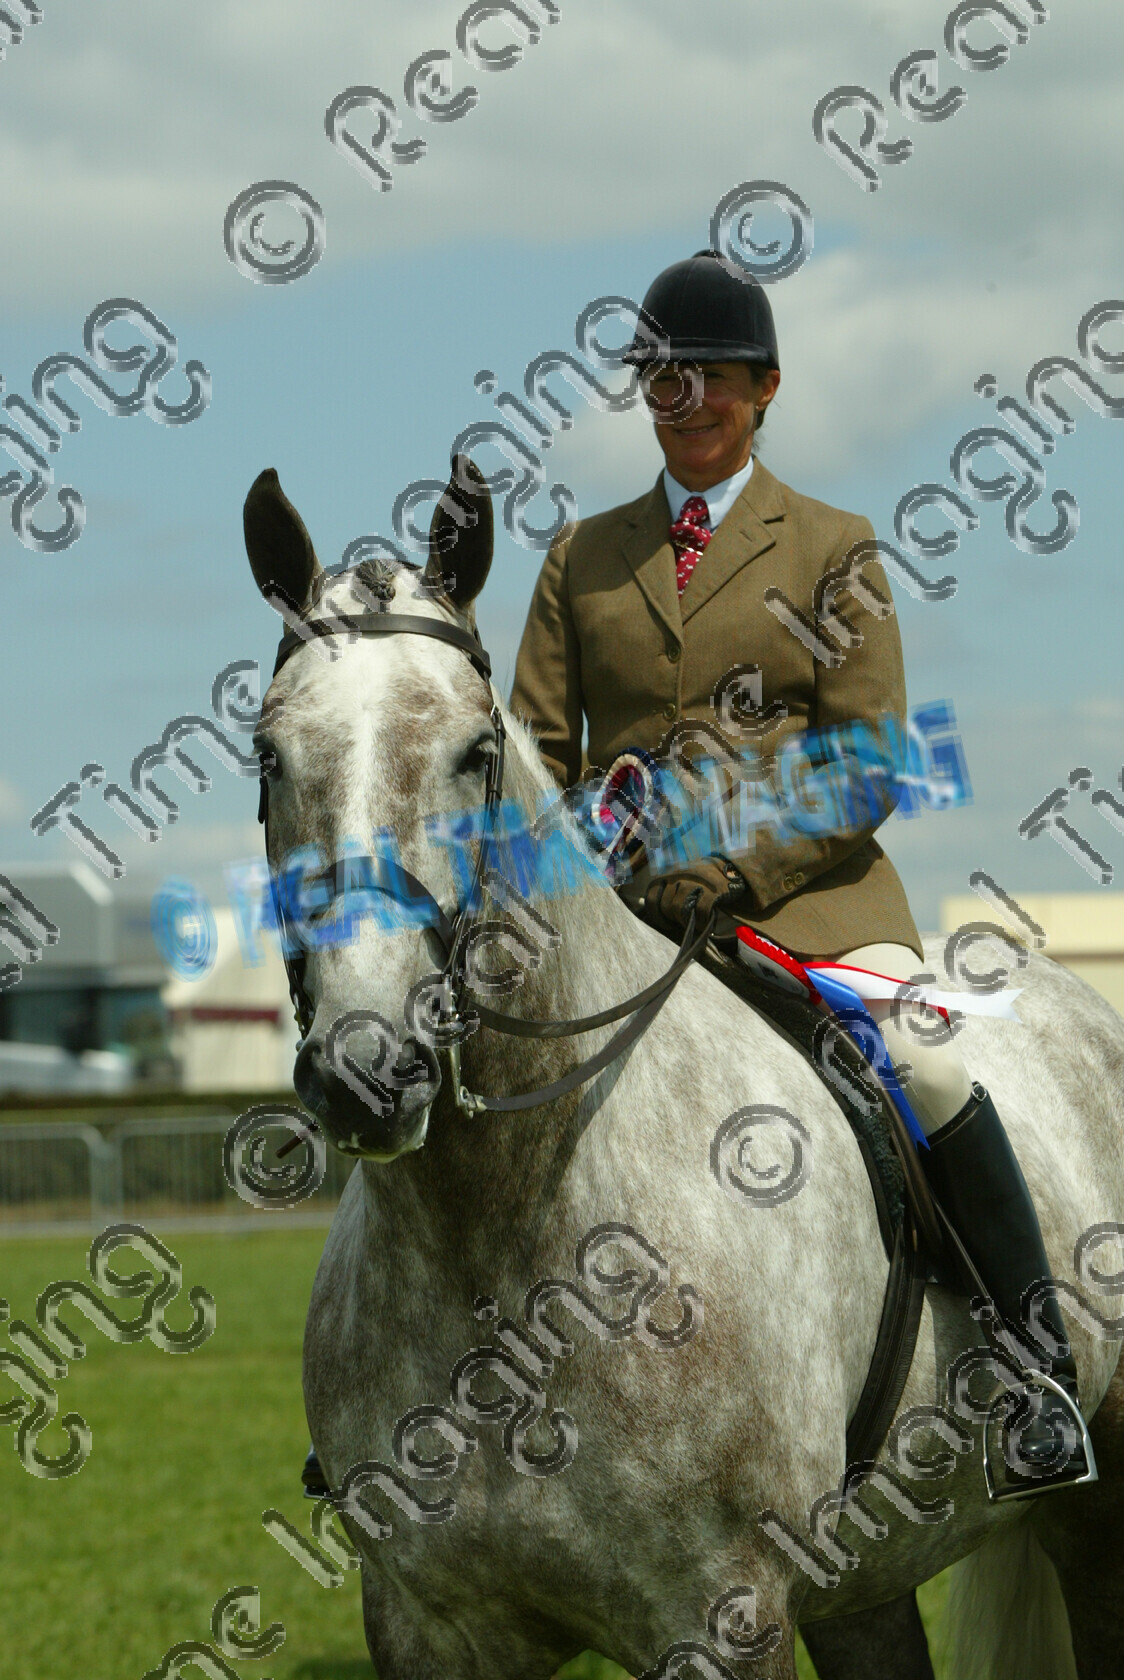 S06-26-T2-005 
 Keywords: Cheshire County Show
Tuesday 20 June 2006
2238 SILVER STREAM
rider Jayne Webber
dappled grey gray
Heavyweight Hunter
horse pony show showing
standing stood
rosette rosettes prize winner
champion first best
presentation award